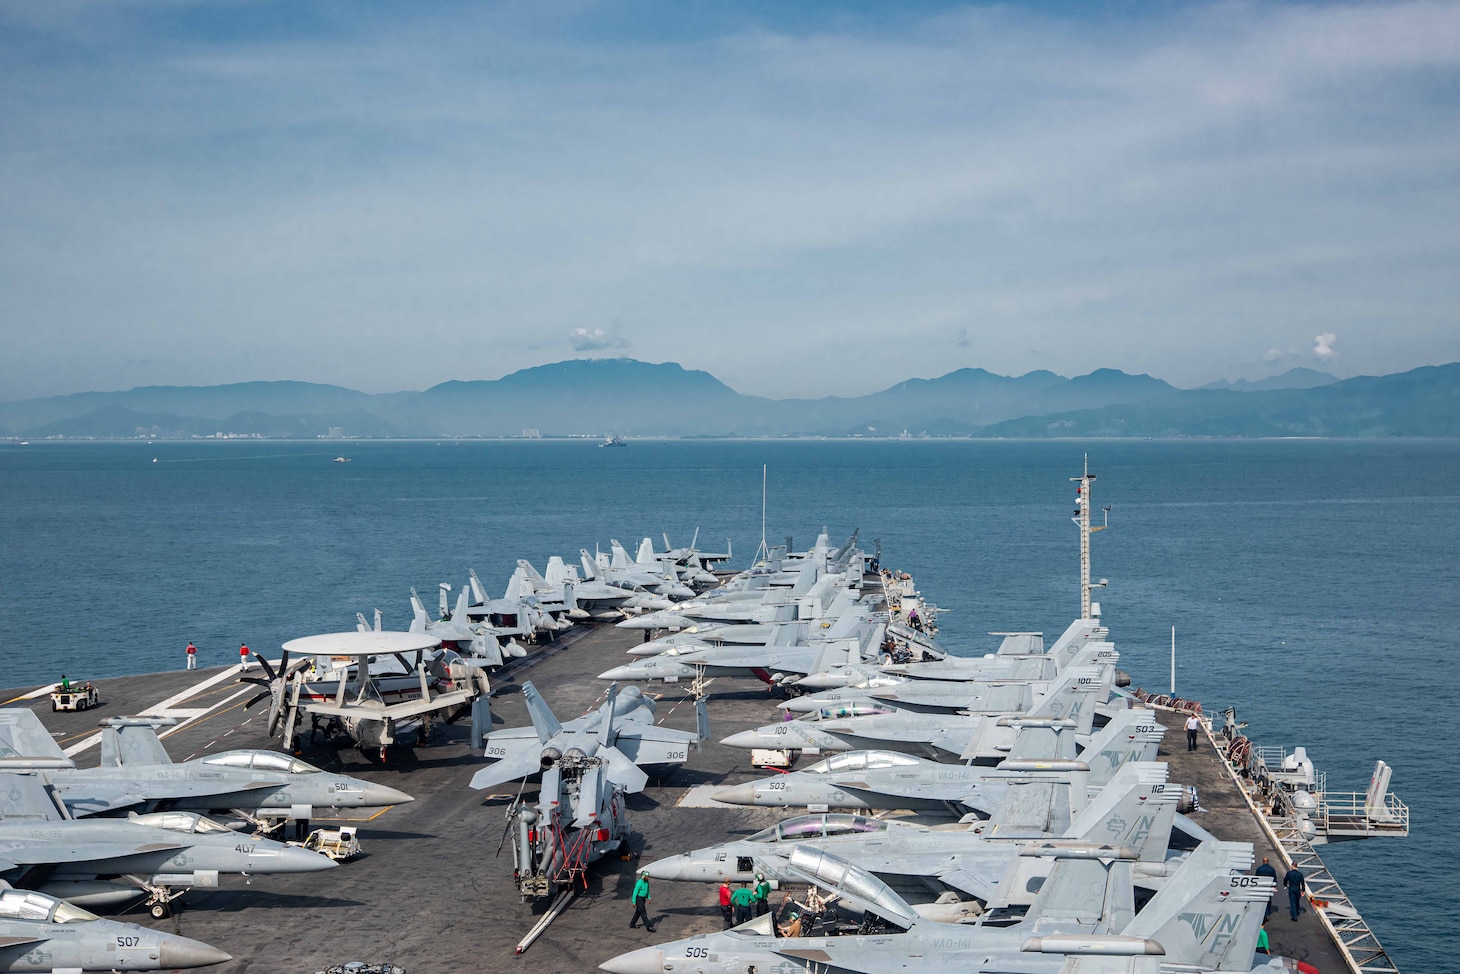 230625-N-OE145-1001 DA NANG, Vietnam (June 25, 2023) The U.S. Navy’s only forward-deployed aircraft carrier, USS Ronald Reagan (CVN 76), approaches Da Nang, Vietnam, for a scheduled port visit June 25, 2023. Ronald Reagan, the flagship of Carrier Strike Group 5, provides a combat-ready force that protects and defends the United States, and supports alliances, partnerships and collective maritime interests in the Indo-Pacific region. (U.S. Navy photo by Mass Communication 3rd Class Jordan Brown)